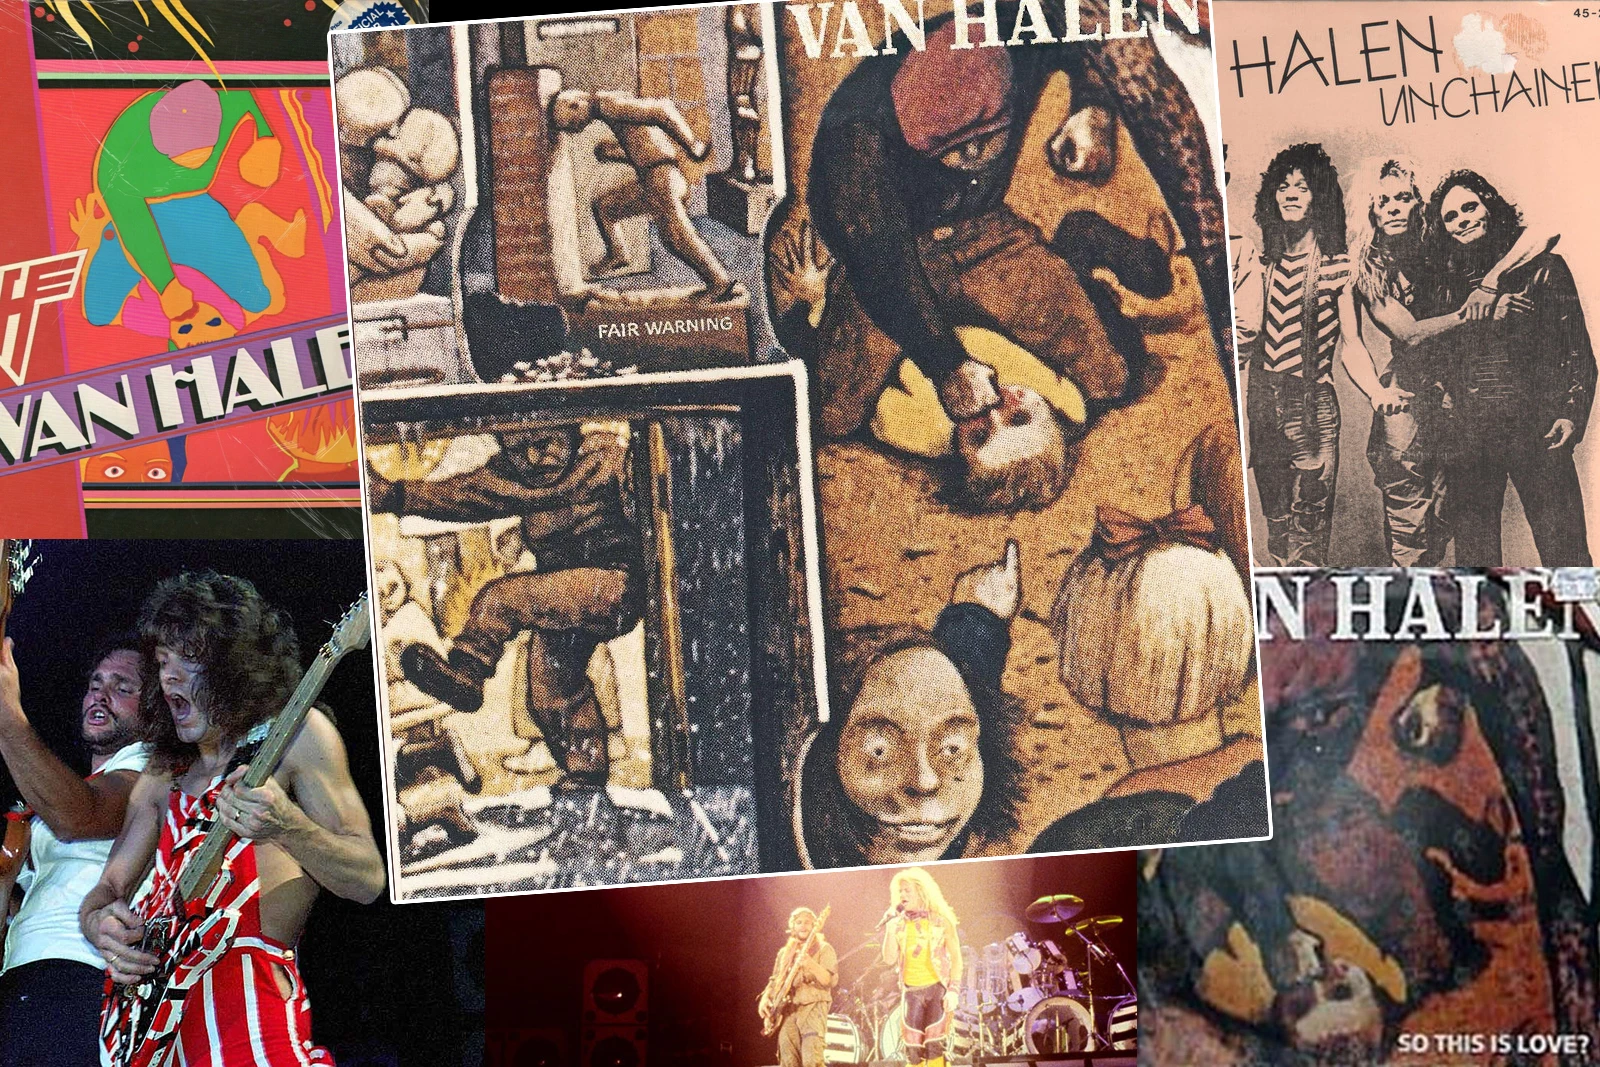 Van Halen's 'Fair Warning': A Track-by-Track Guide